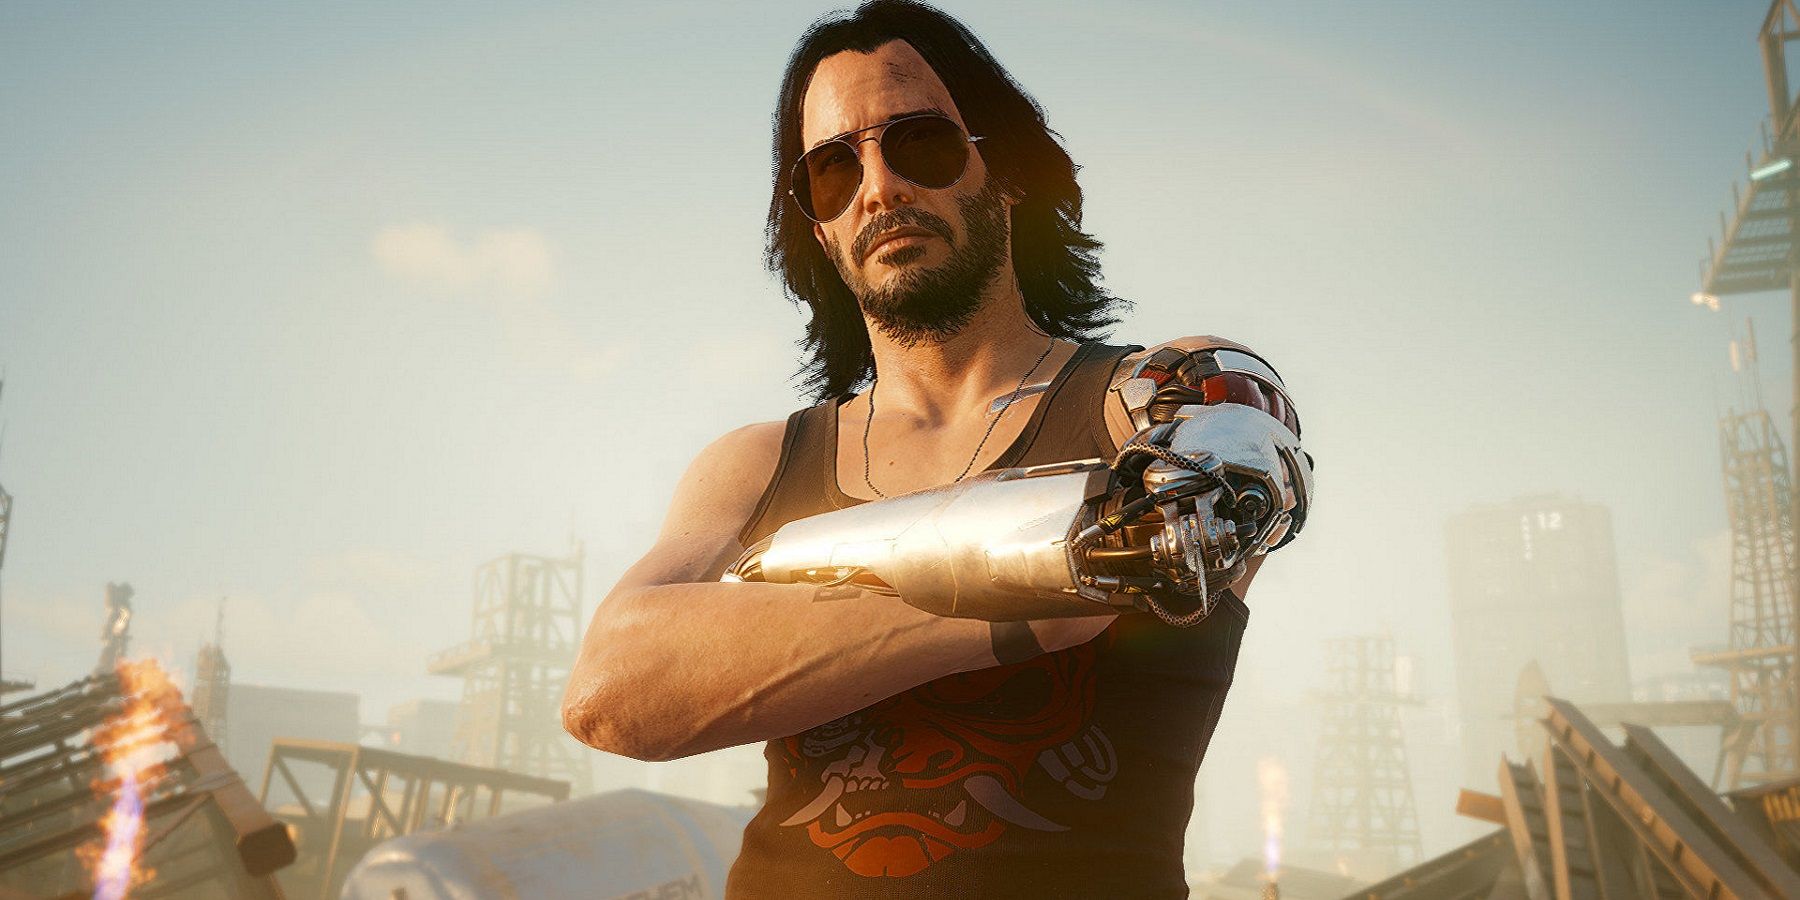 Image from Cyberpunk 2077 showing Johnny Silverhand wearing sunglasses.